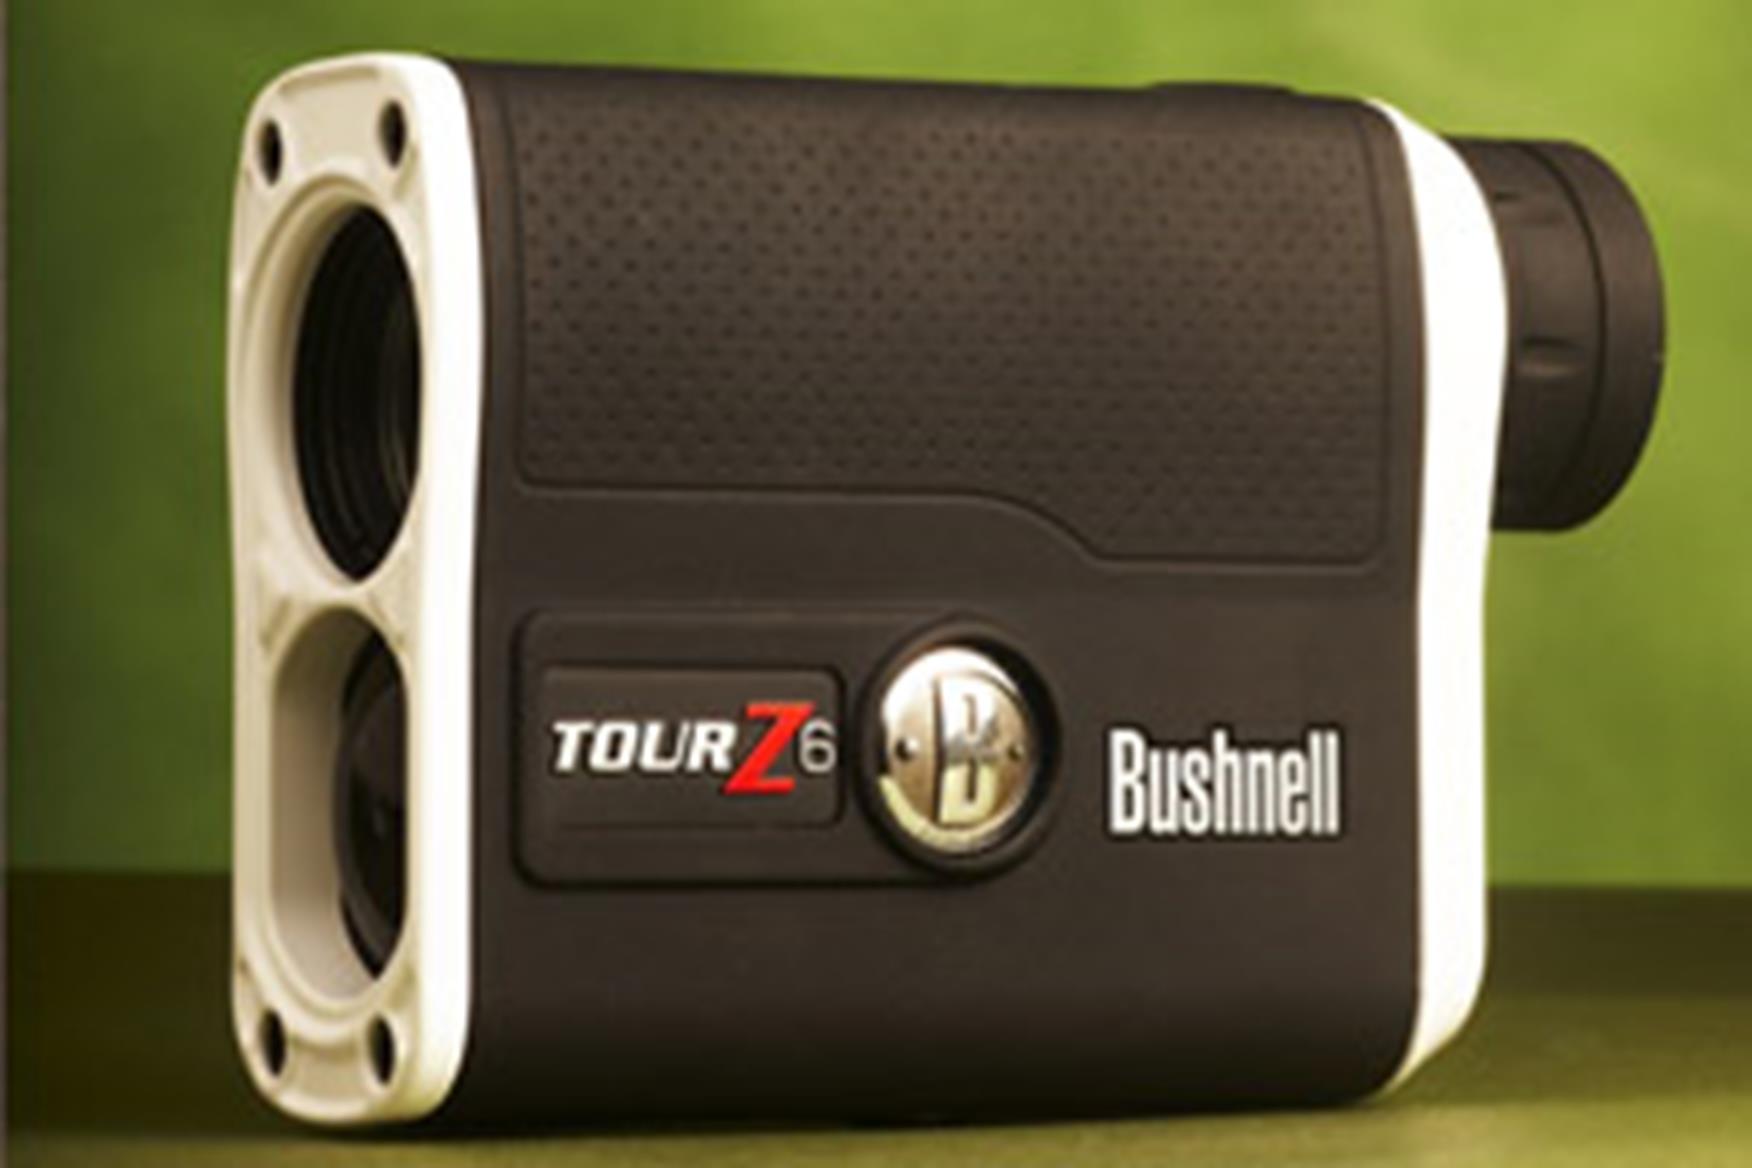 bushnell tour z6 review